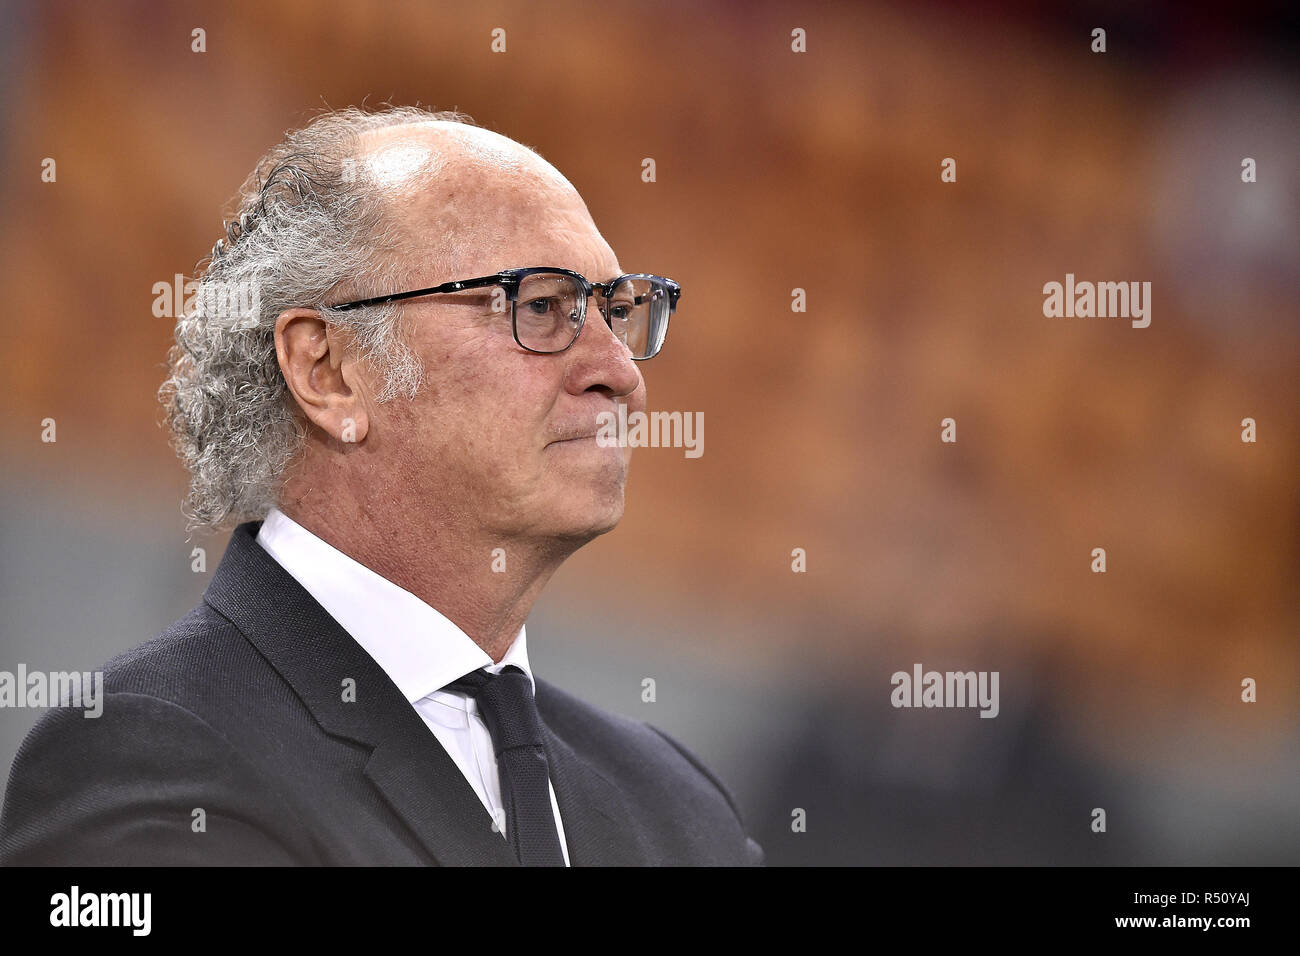 Rome, Italy. 27th Nov, 2018. AS Roma former player Paulo Roberto Falcao before the UEFA Champions League match between Roma and Real Madrid at Stadio Olimpico, Rome, Italy on 27 November 2018. Credit: Giuseppe Maffia/Pacific Press/Alamy Live News Stock Photo